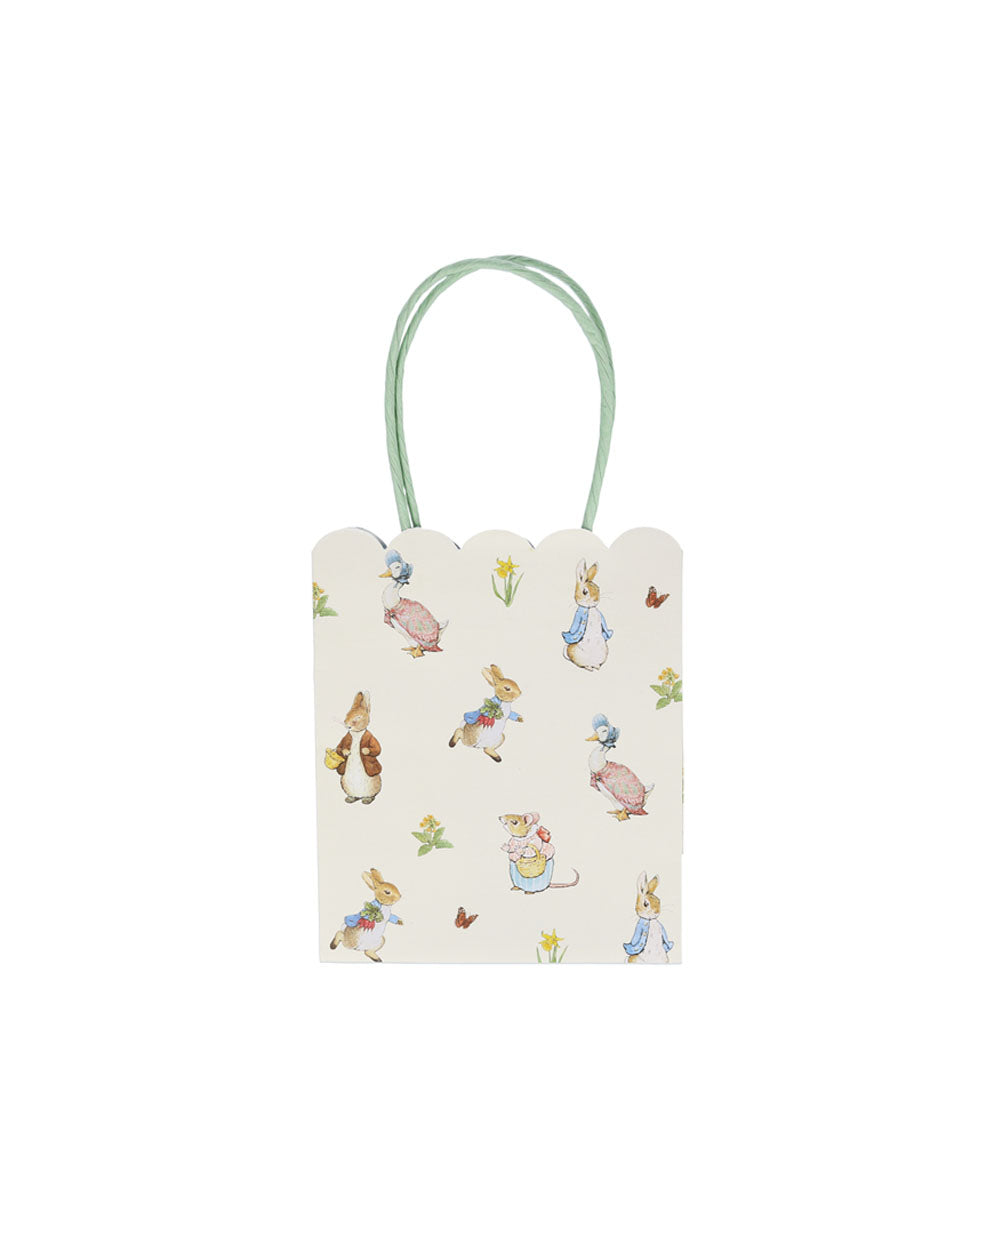 Peter Rabbit and Friends Party Bags